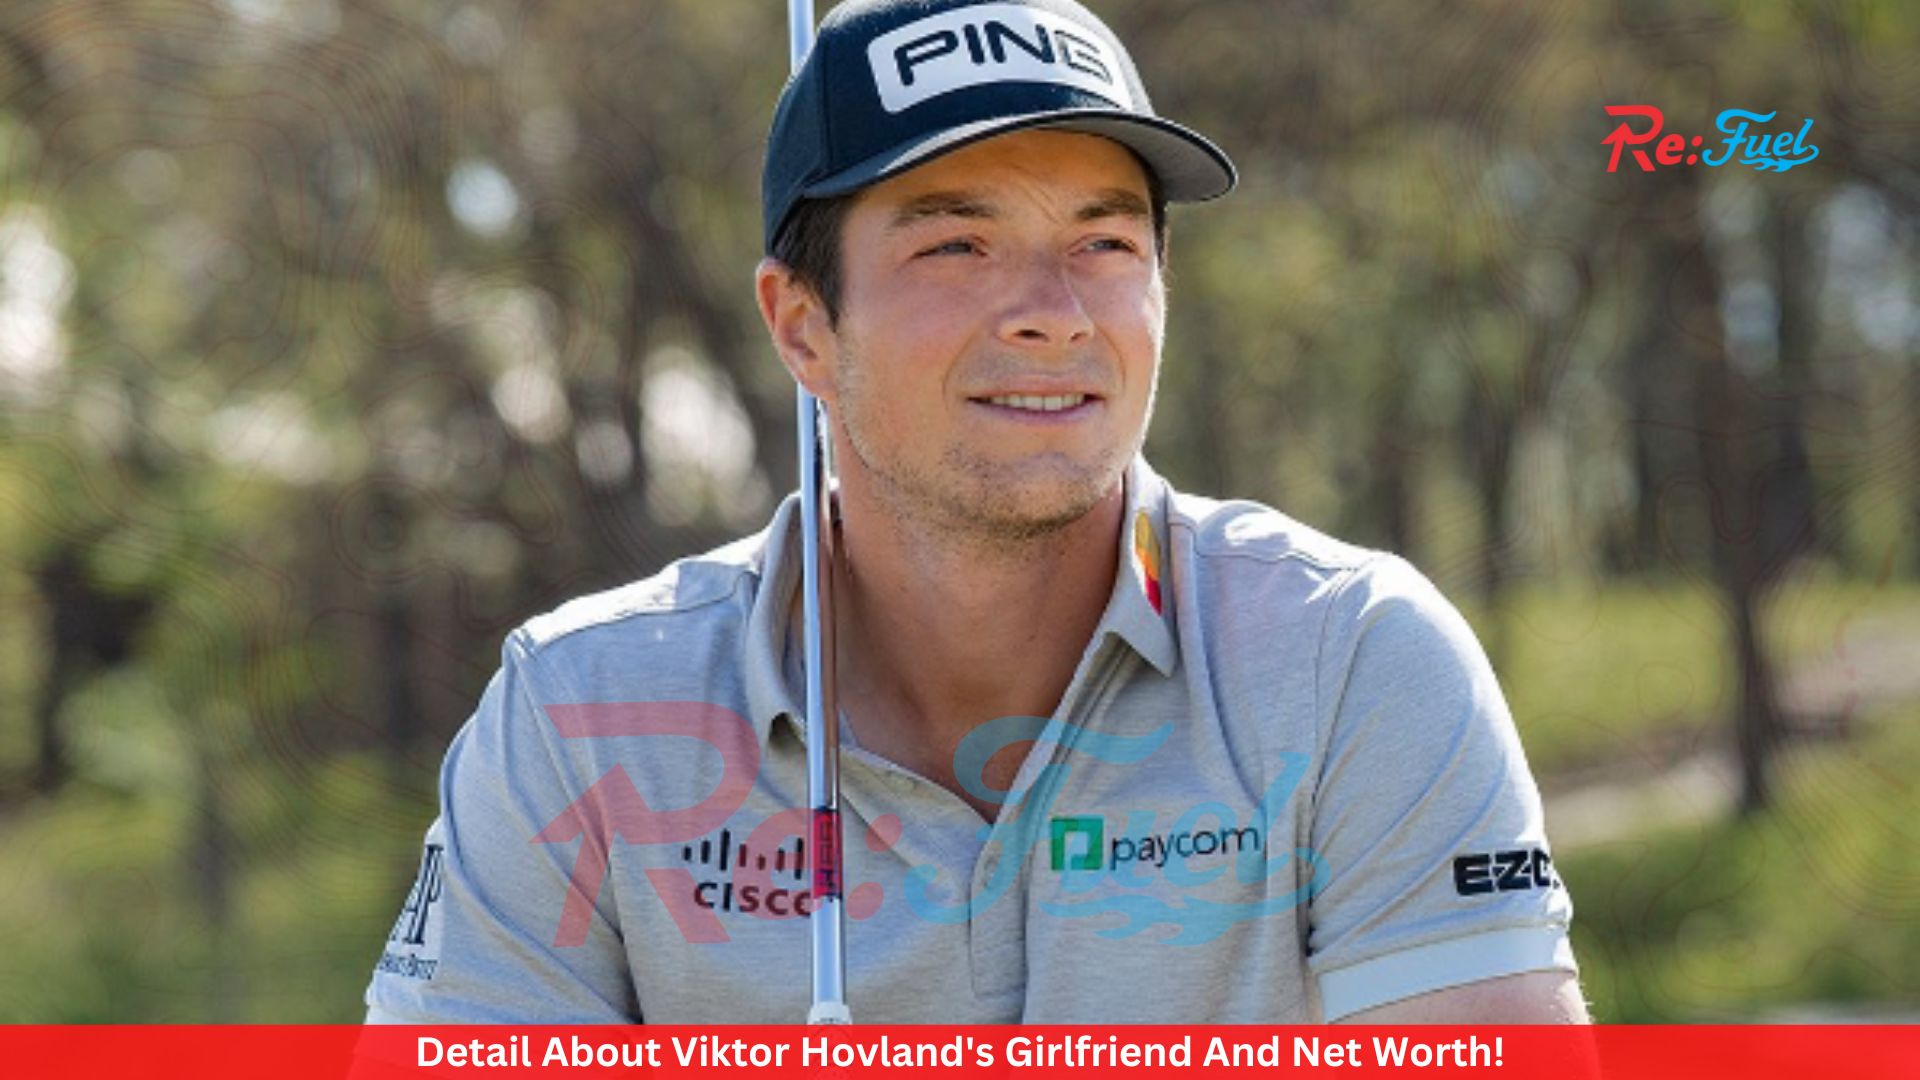 Detail About Viktor Hovland's Girlfriend And Net Worth!